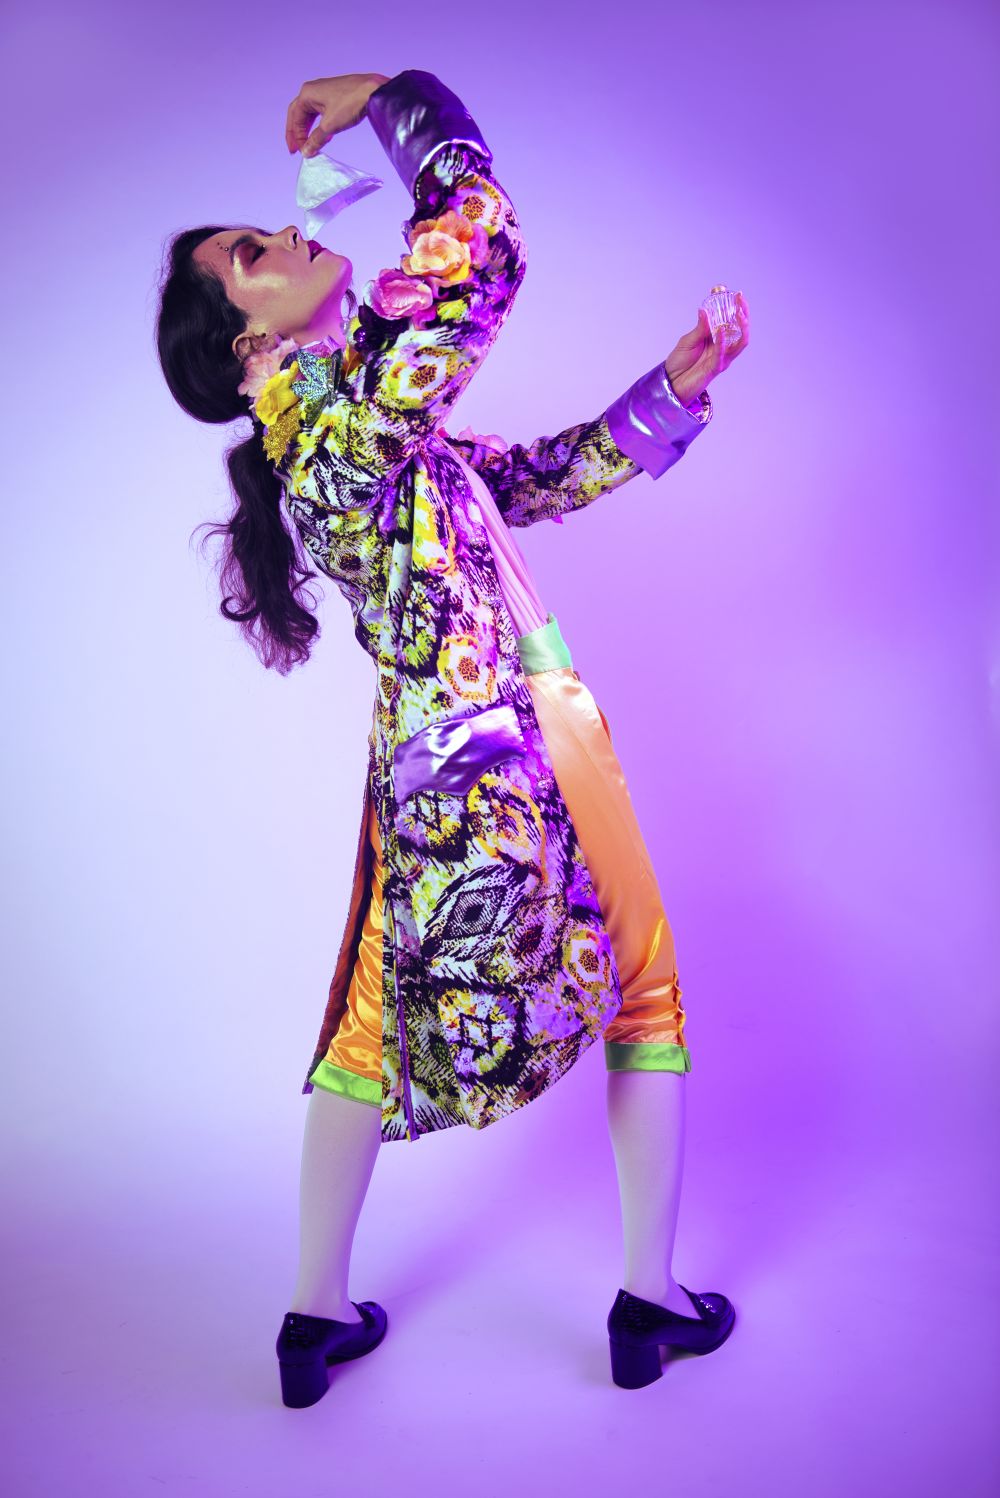 Student in colourful dress behind purple background with perfume bottle.